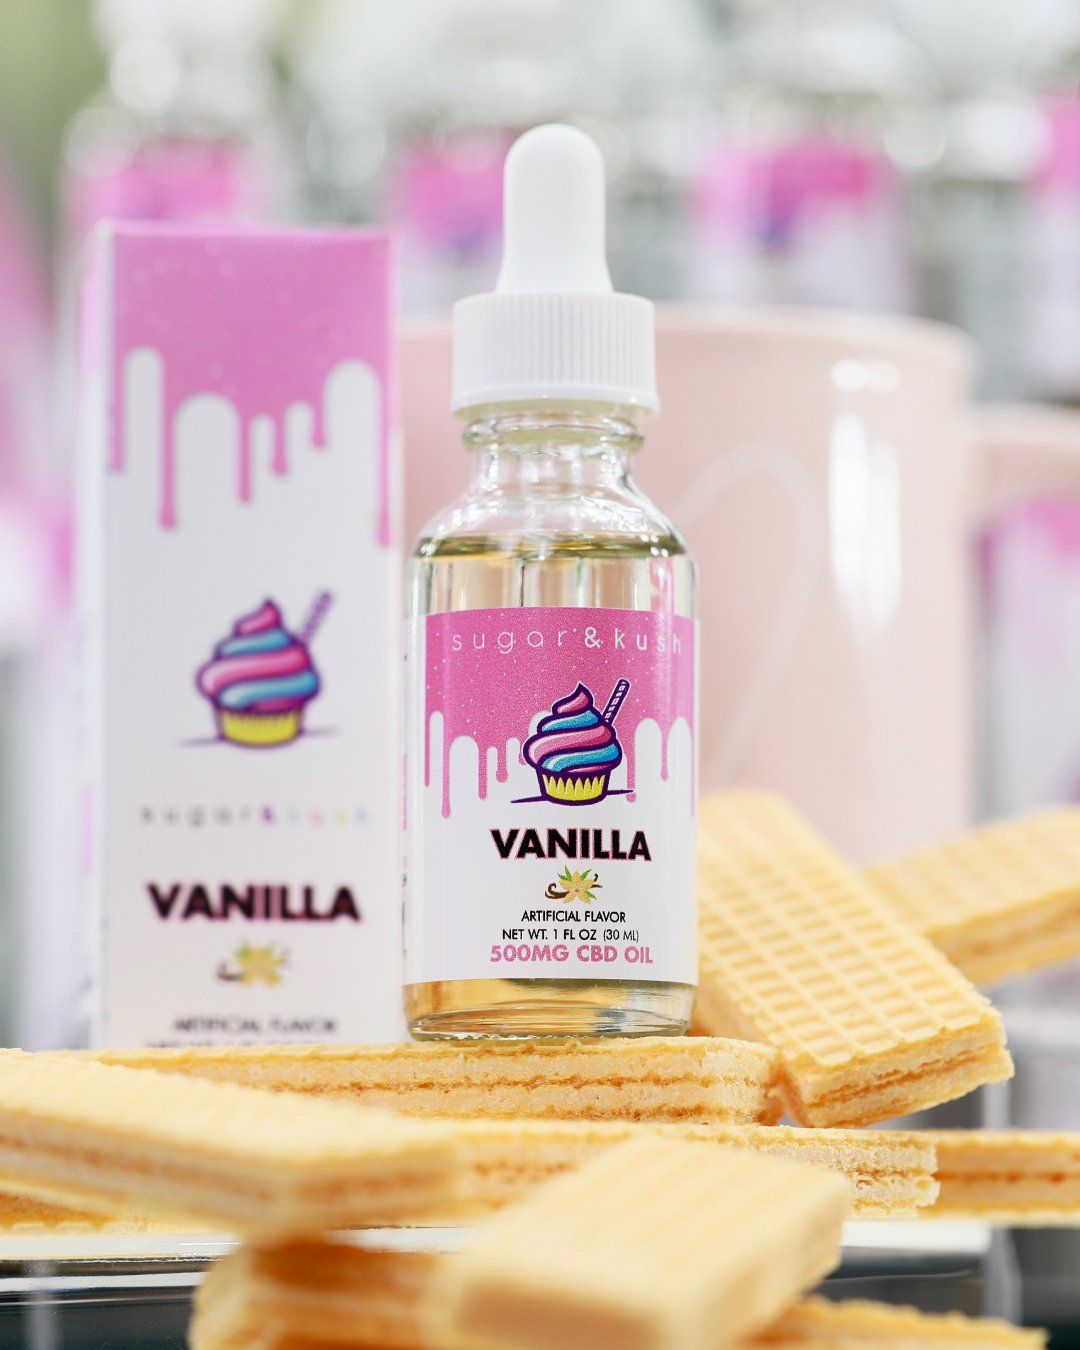 Buy top rated CBD for stress and CBD Oil from Sugar & Kush cbd. Save on our cbd oil vanilla with Sugar & Kush coupon codes.